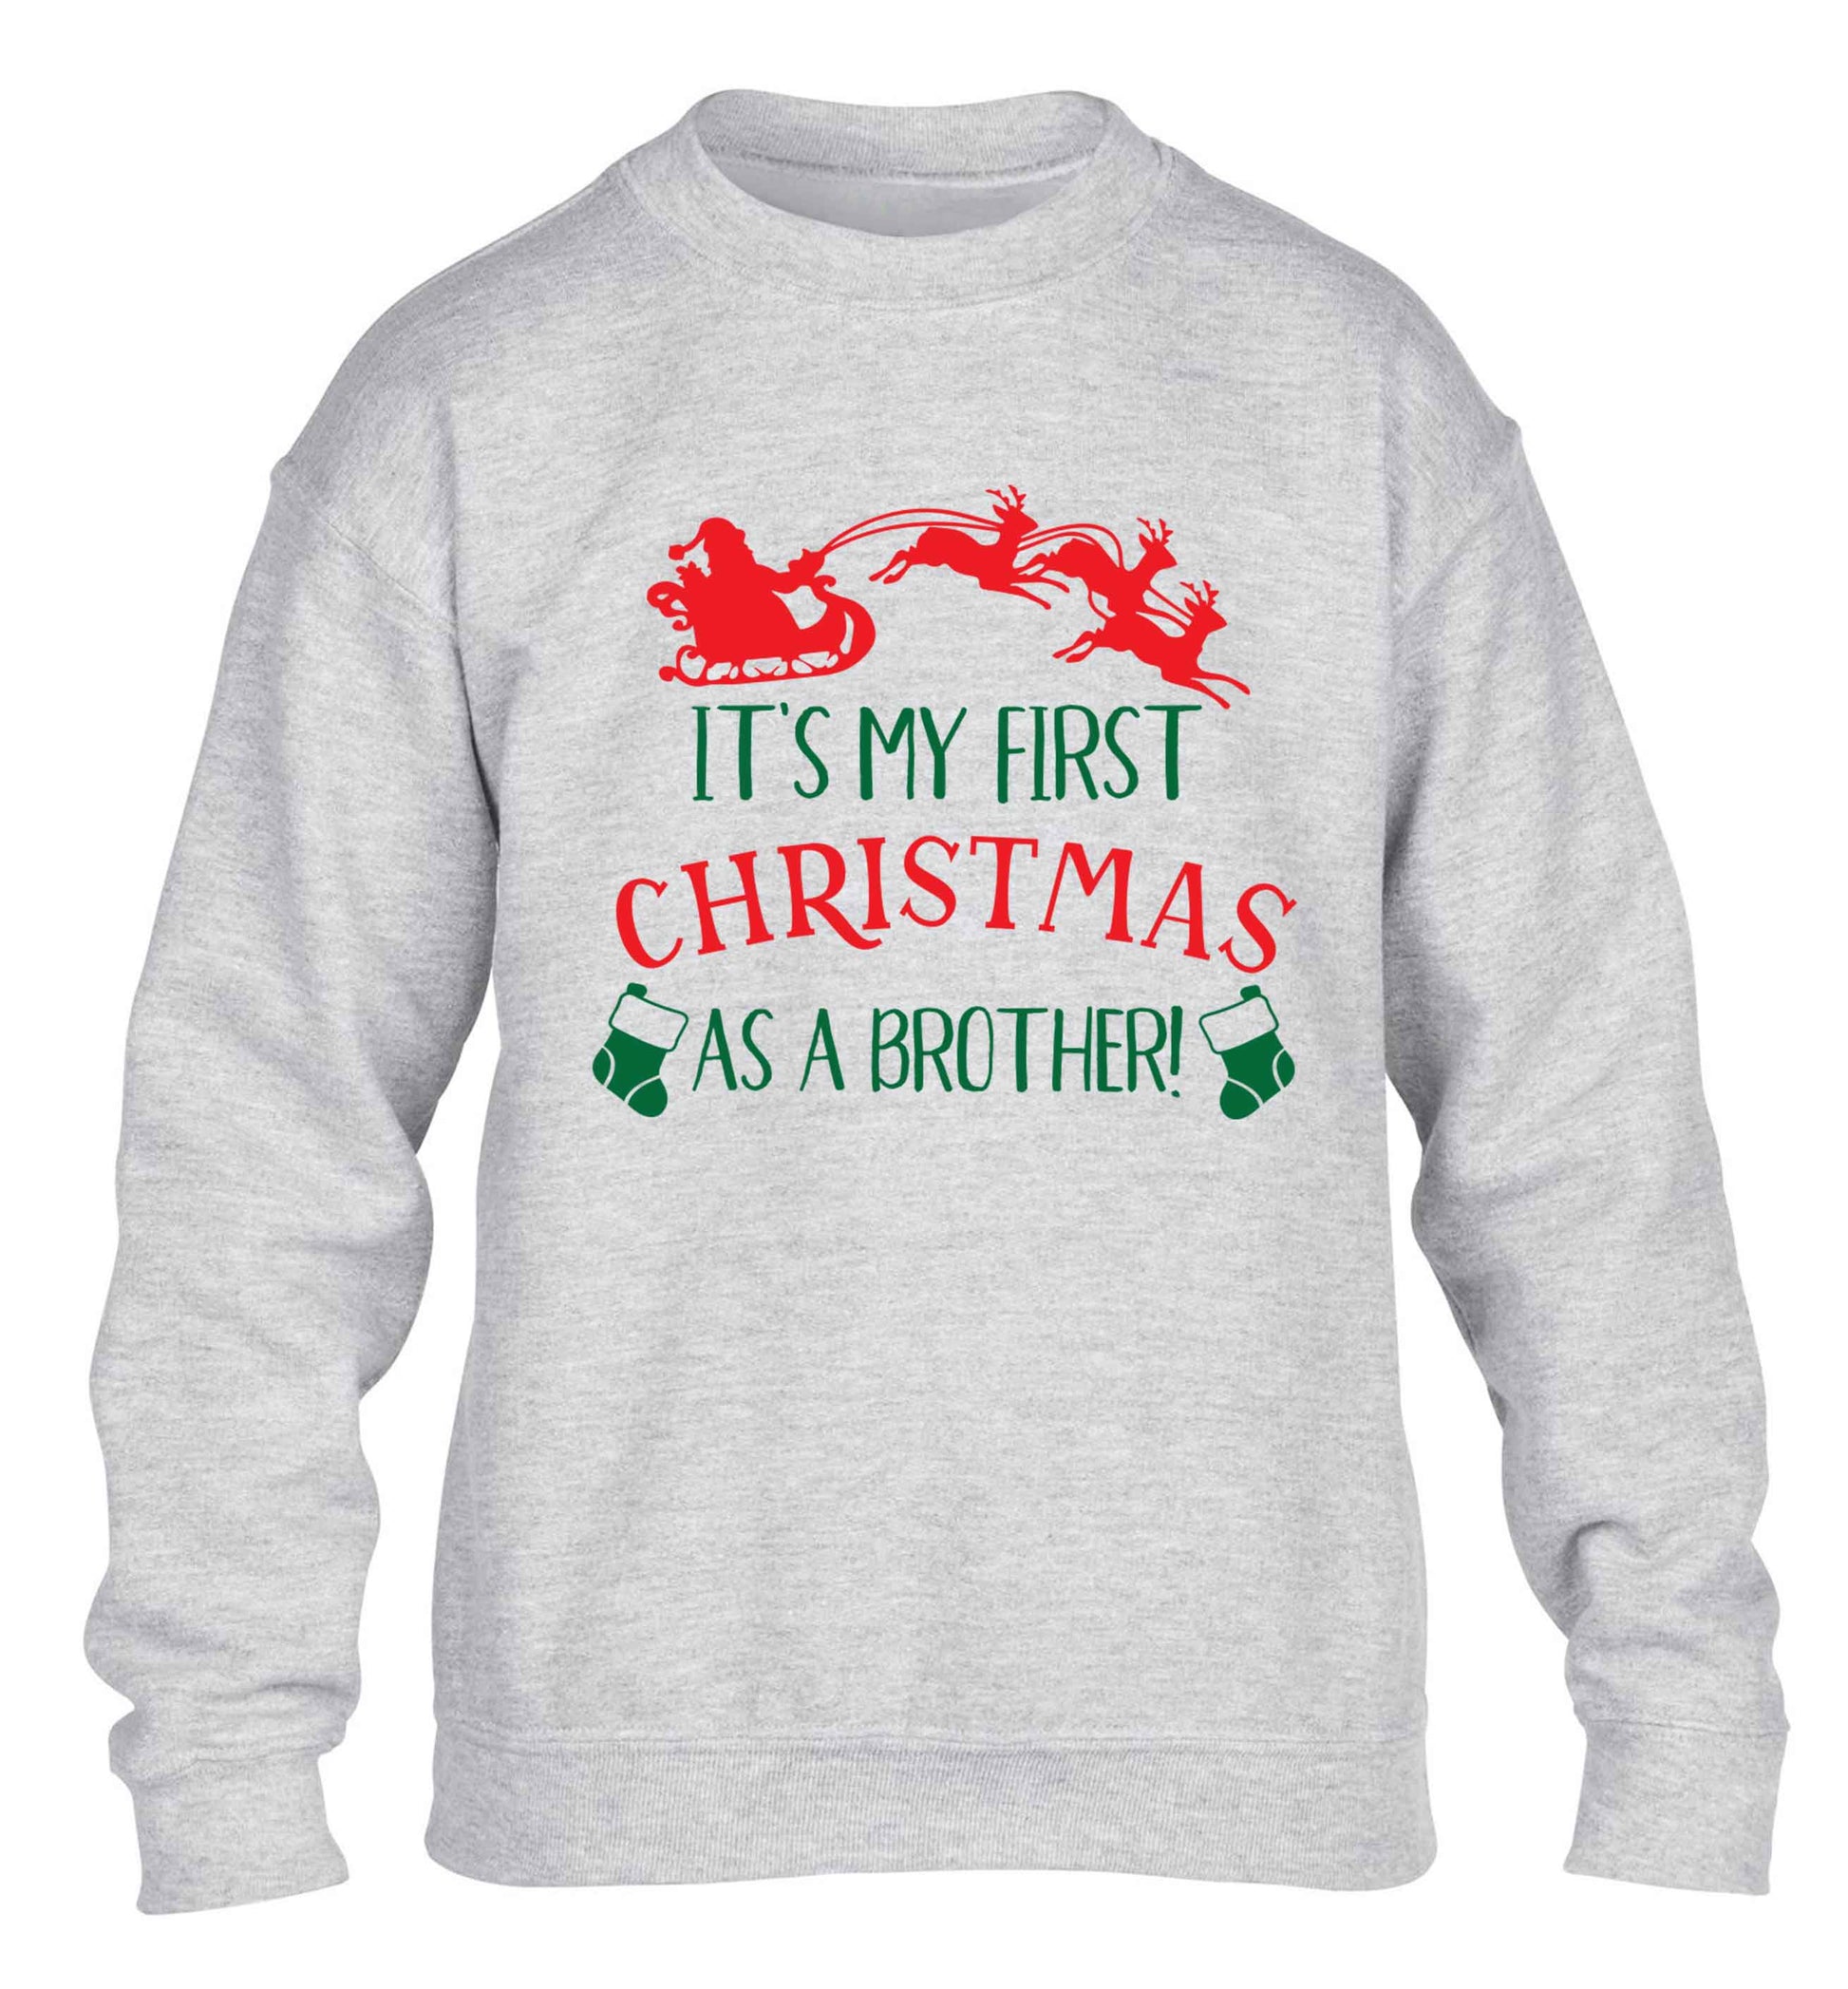 It's my first Christmas as a brother! children's grey sweater 12-13 Years